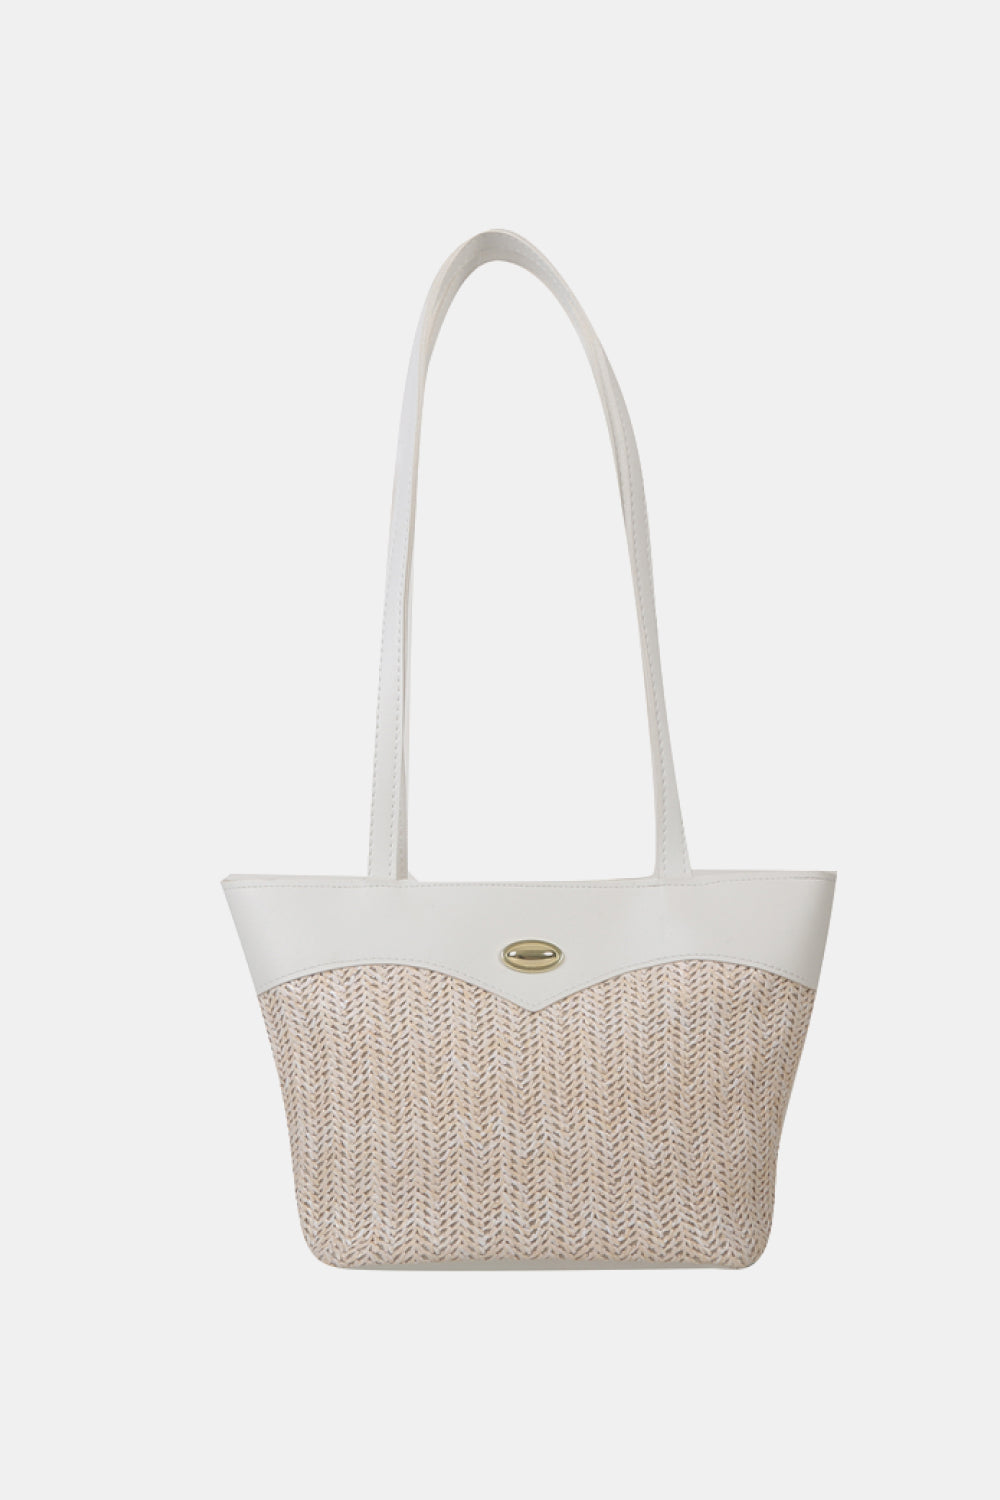 Cape Cod Vintage Woven Straw Two-Tone Tote Bag - Black, Olive or Ivory